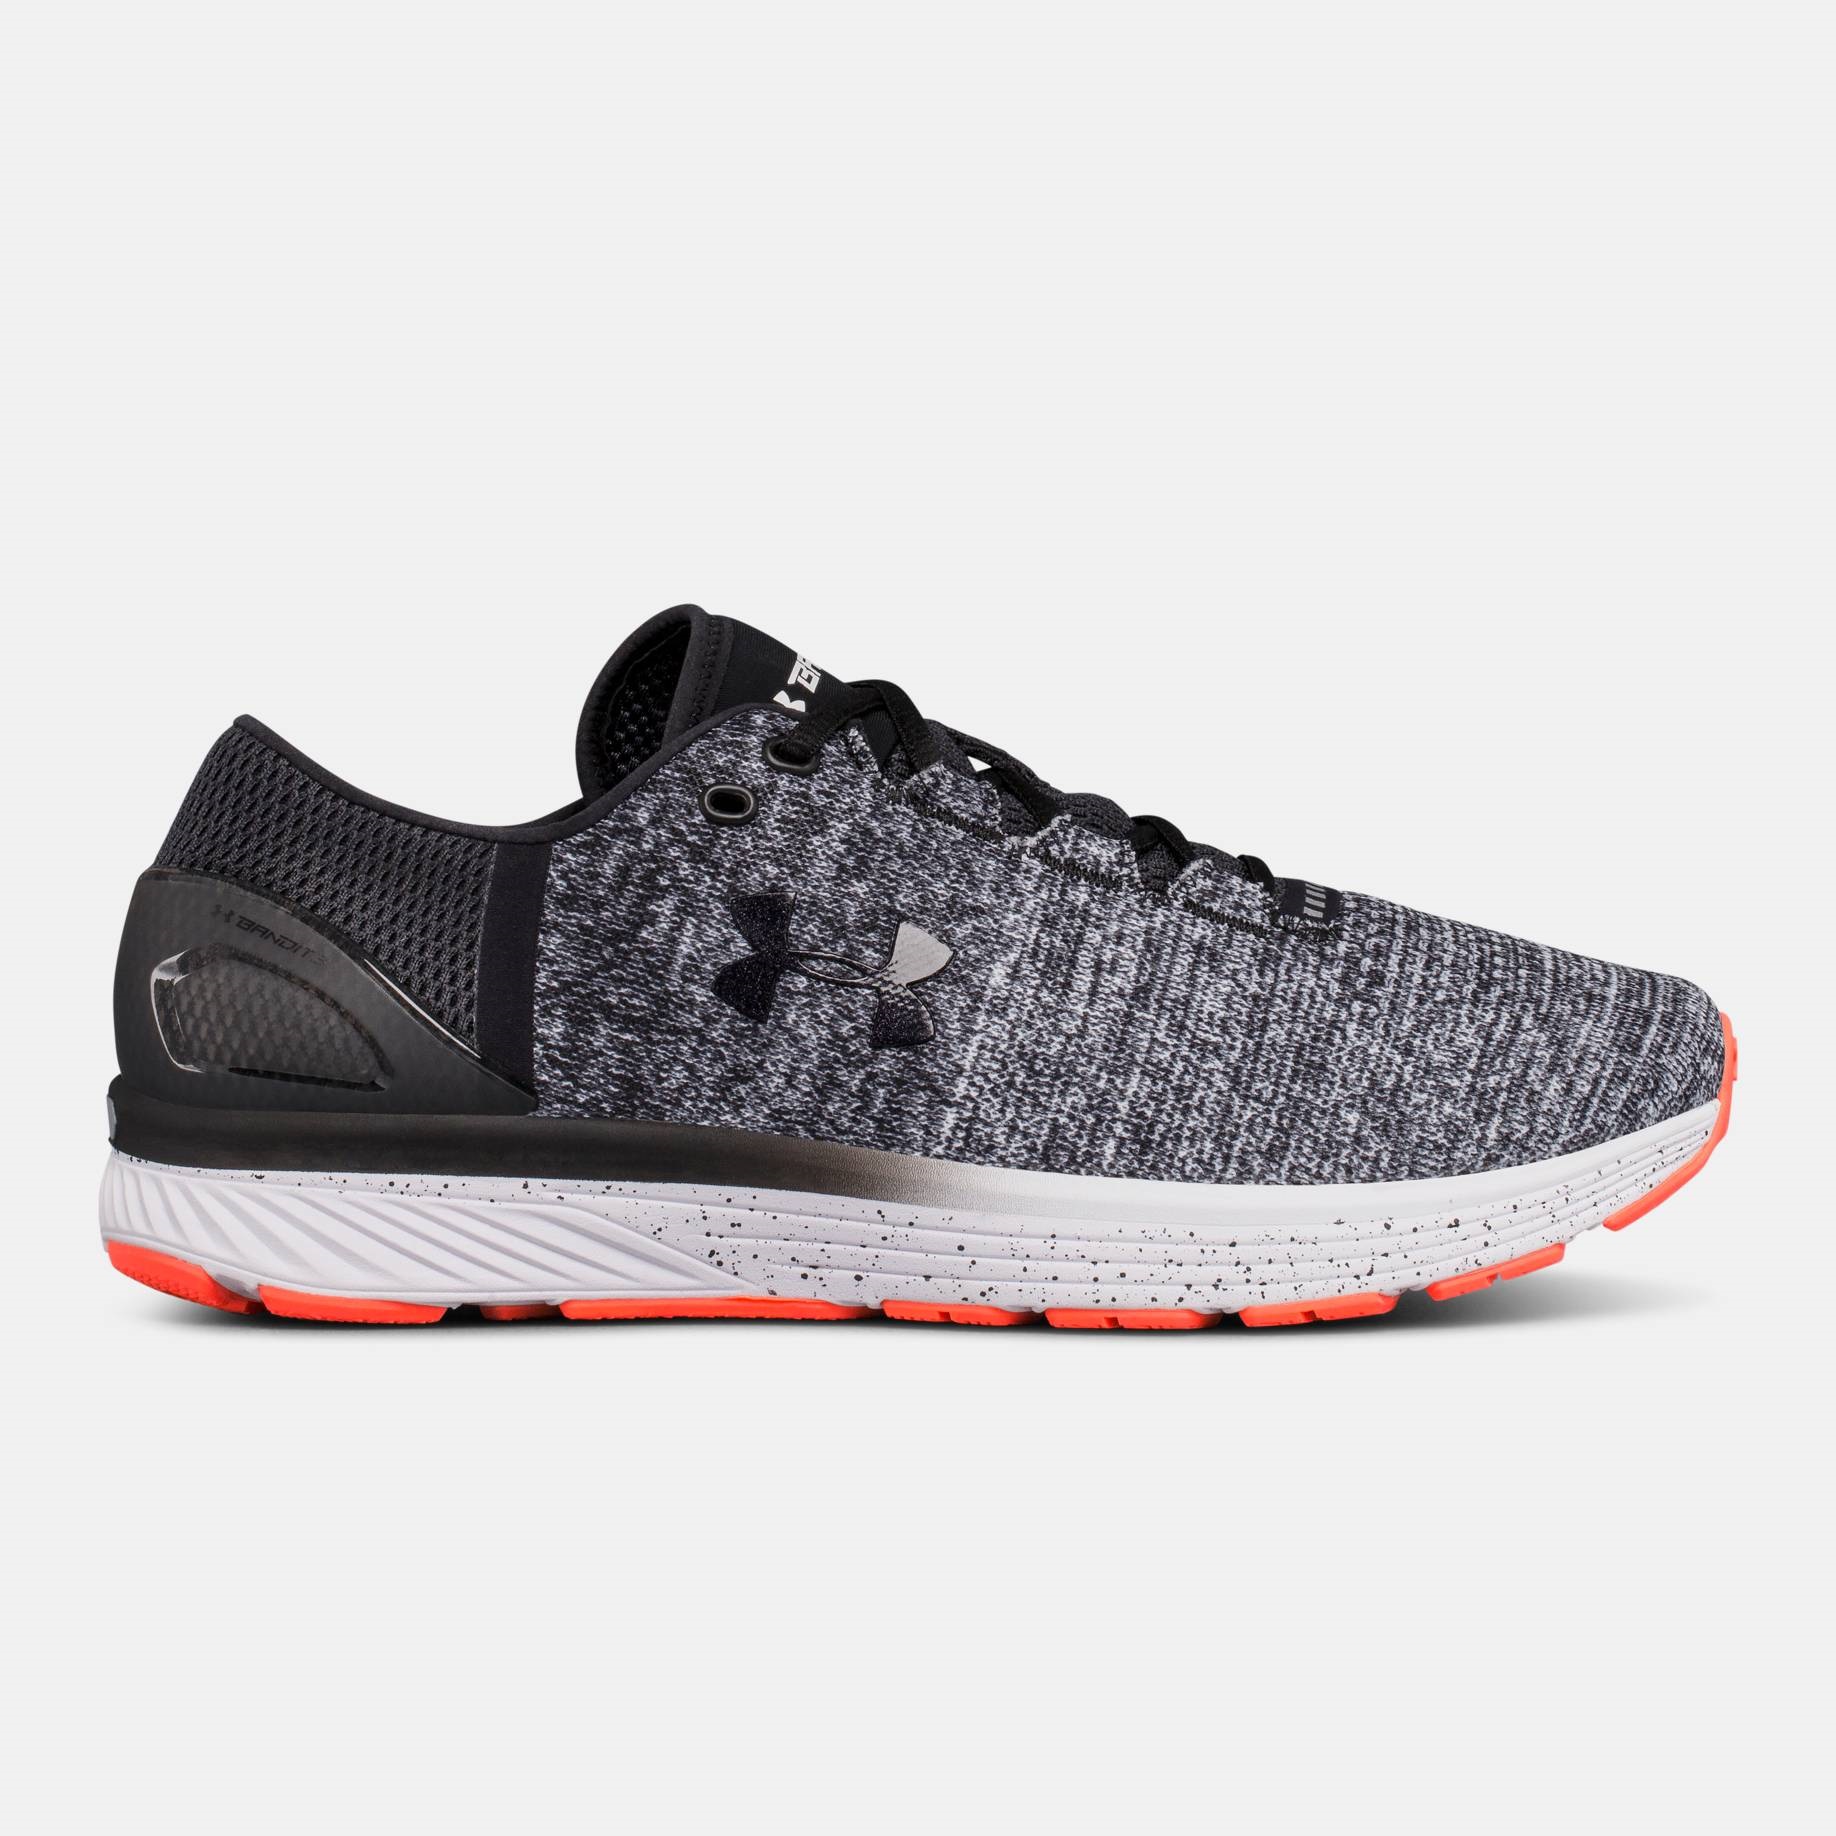 Under armour Charged Bandit 3 5725 